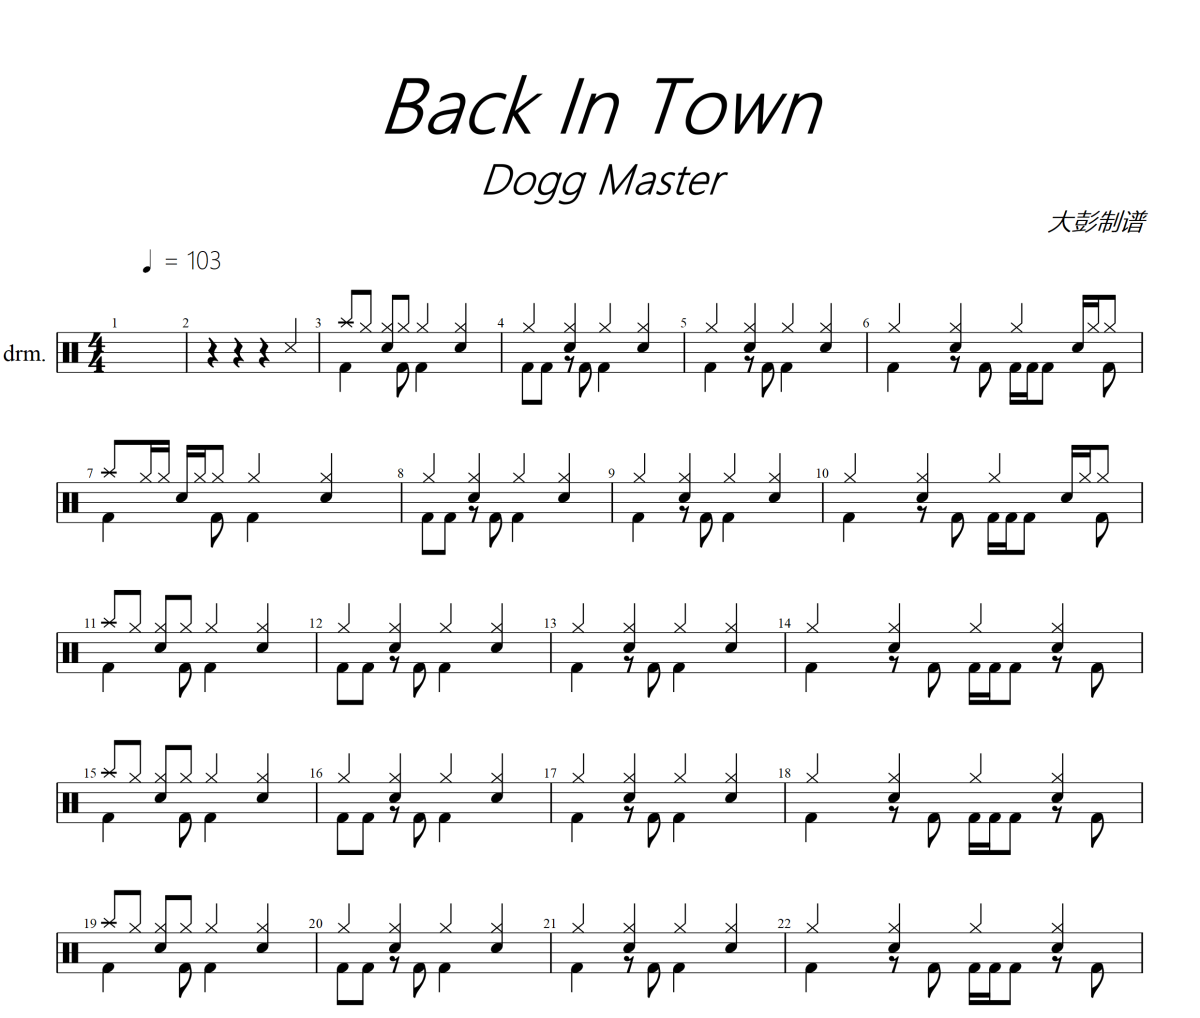 Back In Town鼓谱 Dogg Master《Back In Town》架子鼓|爵士鼓|鼓谱+动态视频